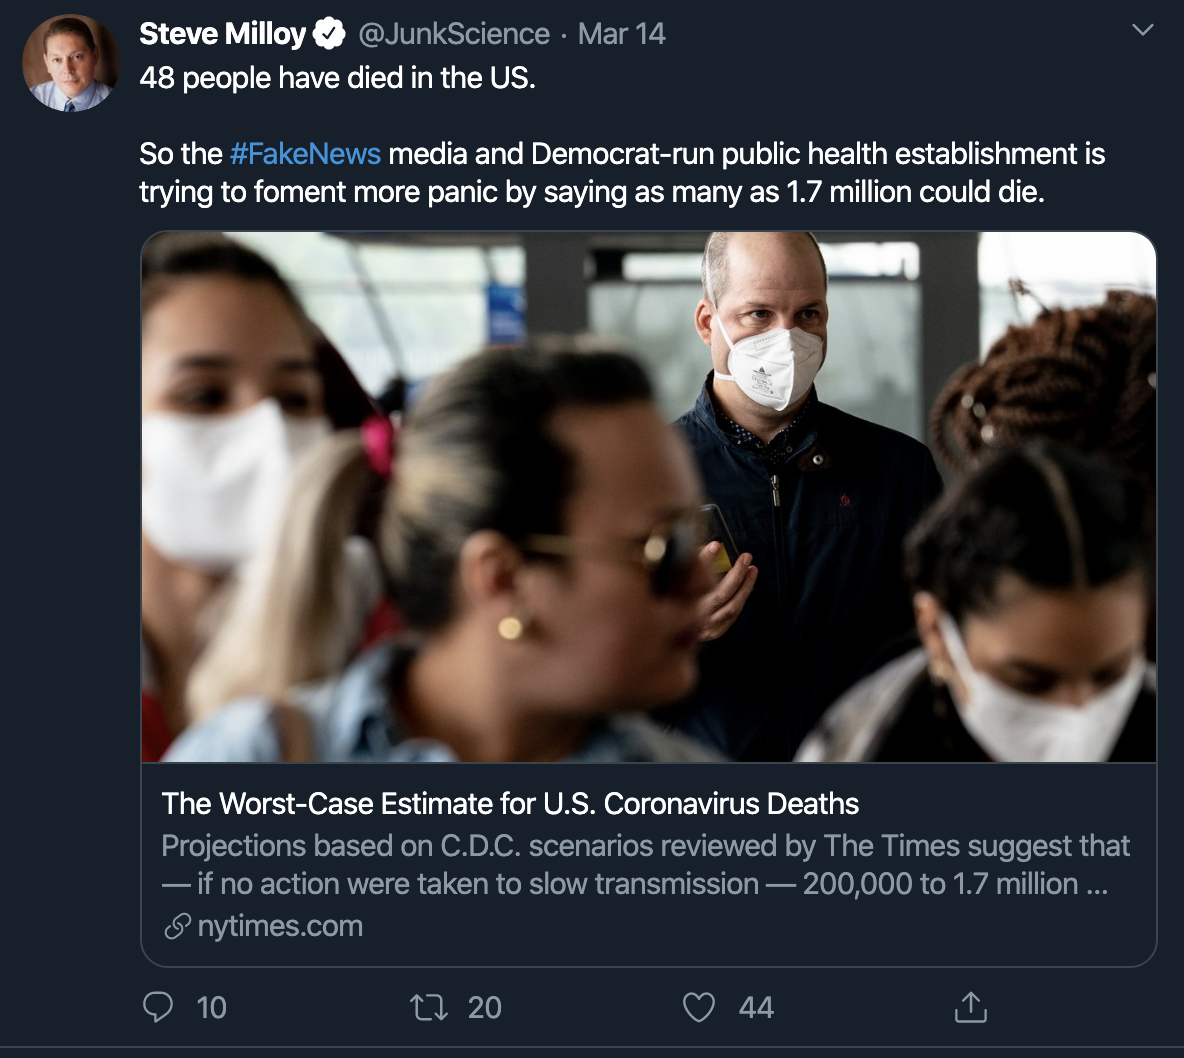 48 people have died in the US. So the #FakeNews media and Democrat-run public health establishment is trying to foment more panic by saying as many as 1.7 million could die.